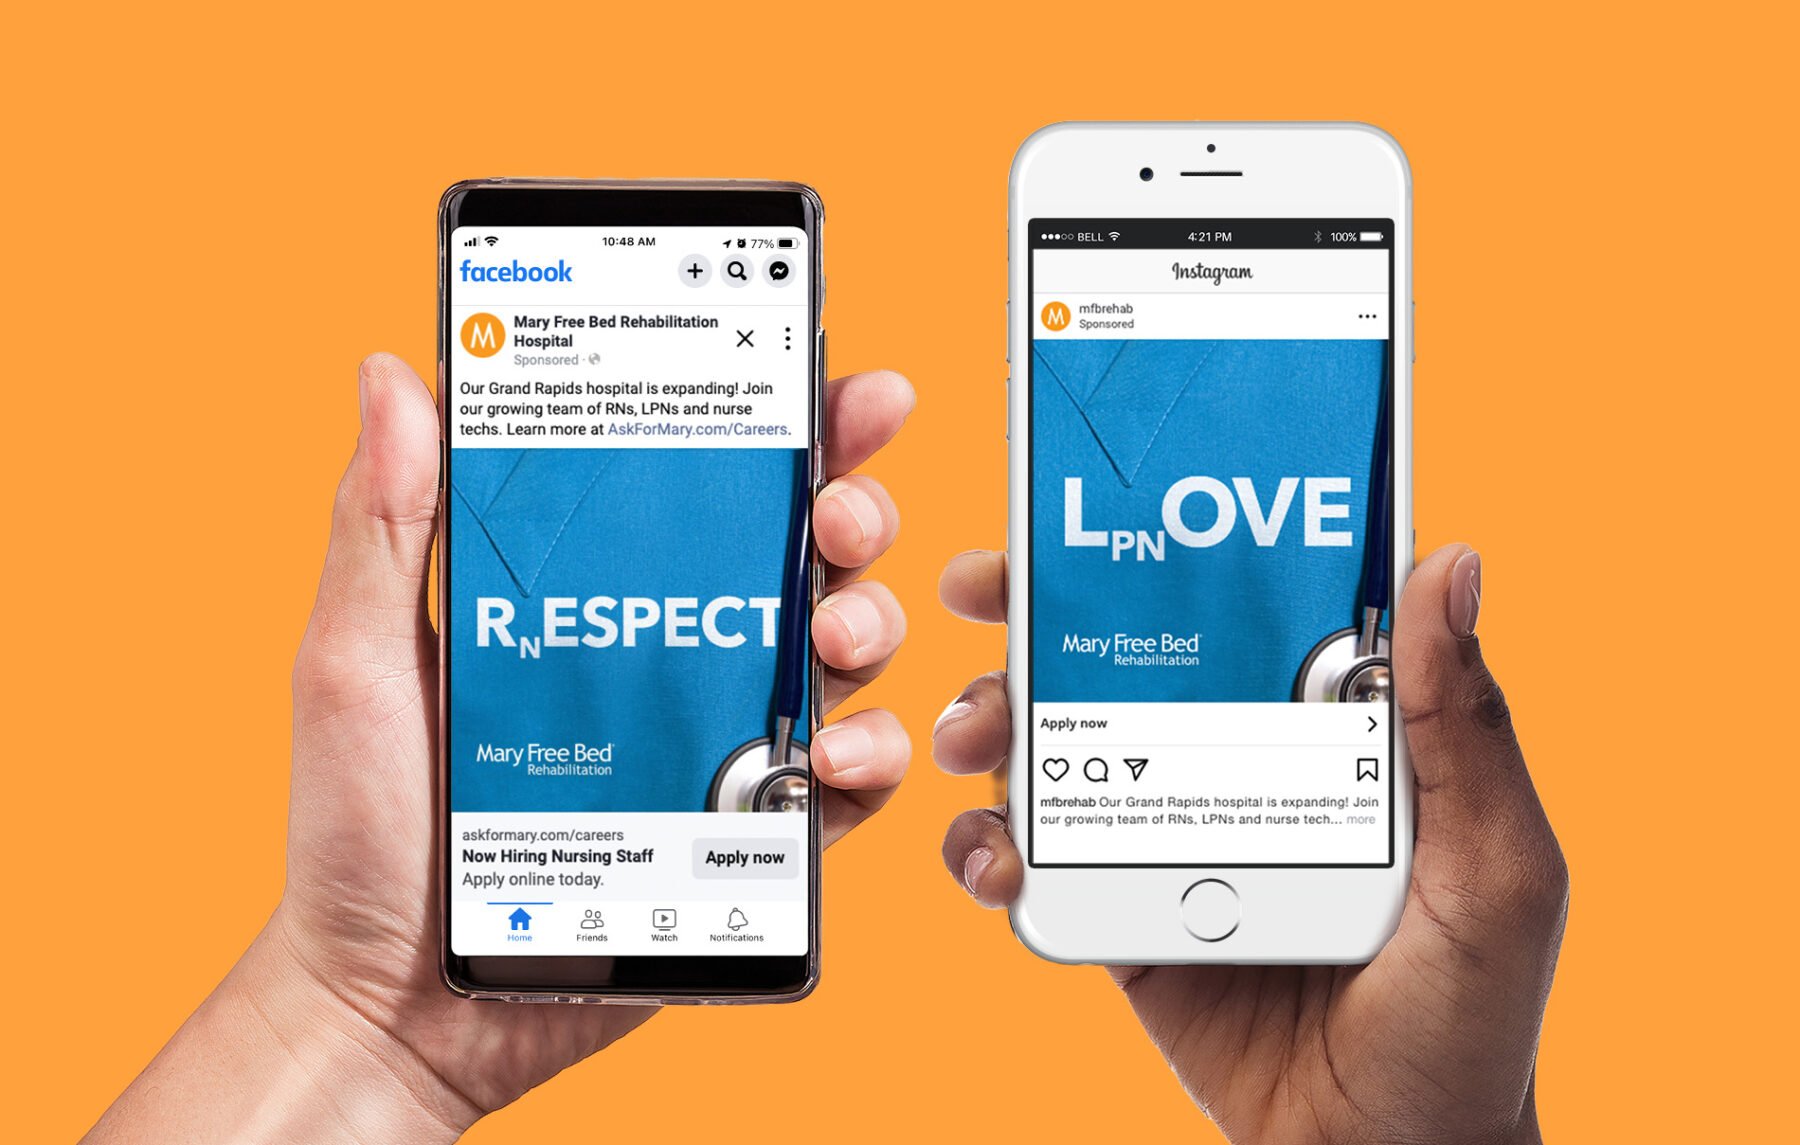 Hiring campaign's social media advertisements mocked onto cell phones with headlines "RnESPECT" and "LpnOVE"